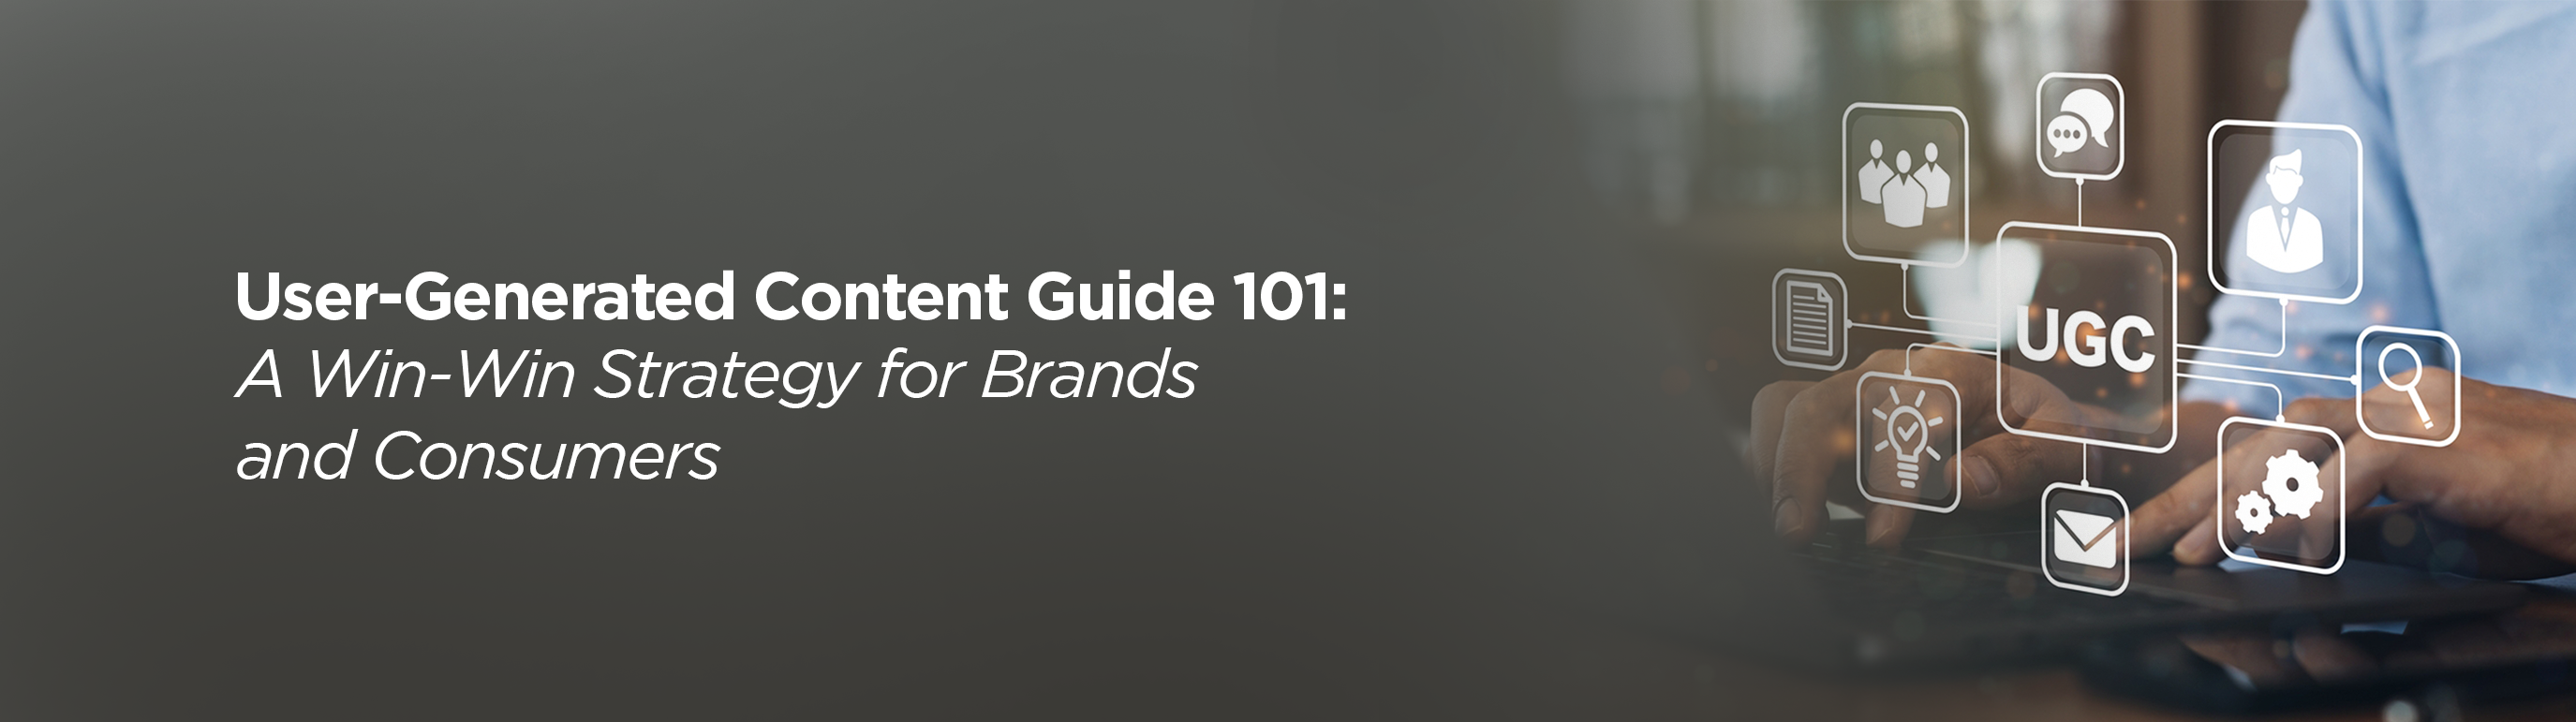 User-Generated Content Guide 101: A Win-Win Strategy for Brands and Consumers